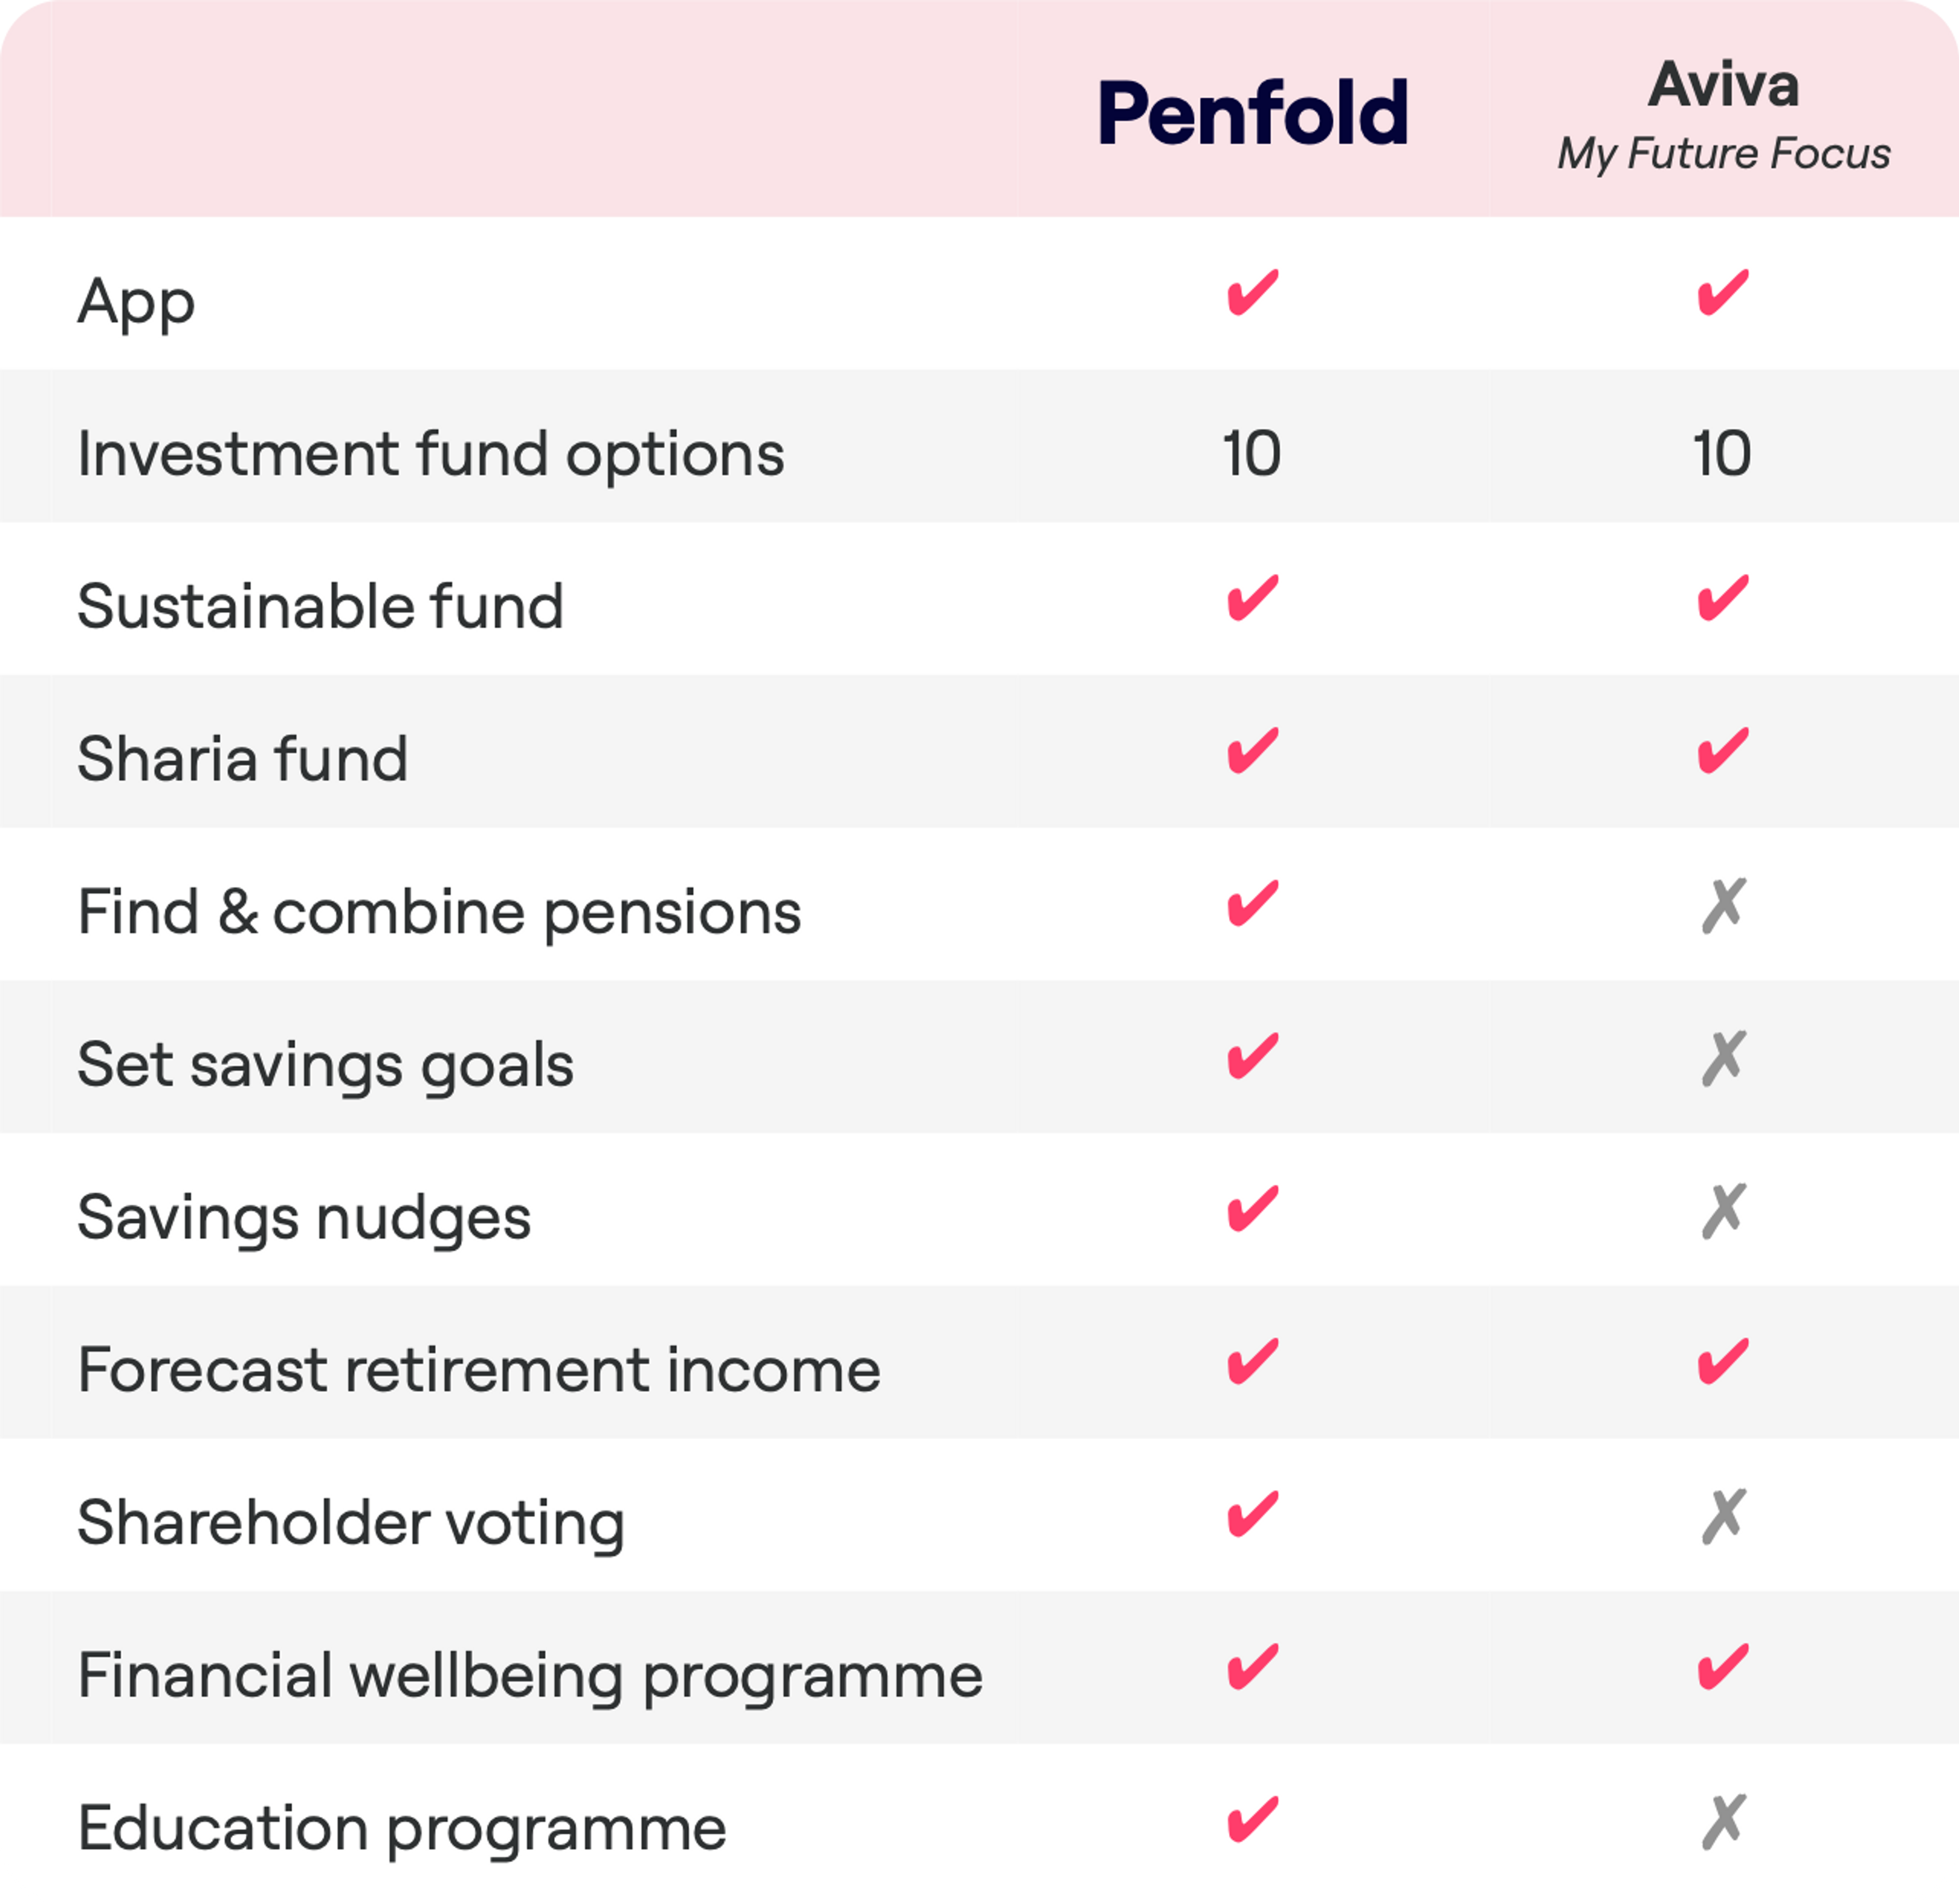 A feature comparison chart for Penfold and Aviva's My Future Focus. Both offer a mobile app, 10 investment fund options, a sustainable fund, and a Sharia fund. Penfold additionally allows clients to find and combine pensions, set savings goals, receive savings nudges, forecast retirement income, and participate in shareholder voting, and it offers a financial wellbeing and an education programme. Aviva does not offer these features, except for a financial wellbeing programme.